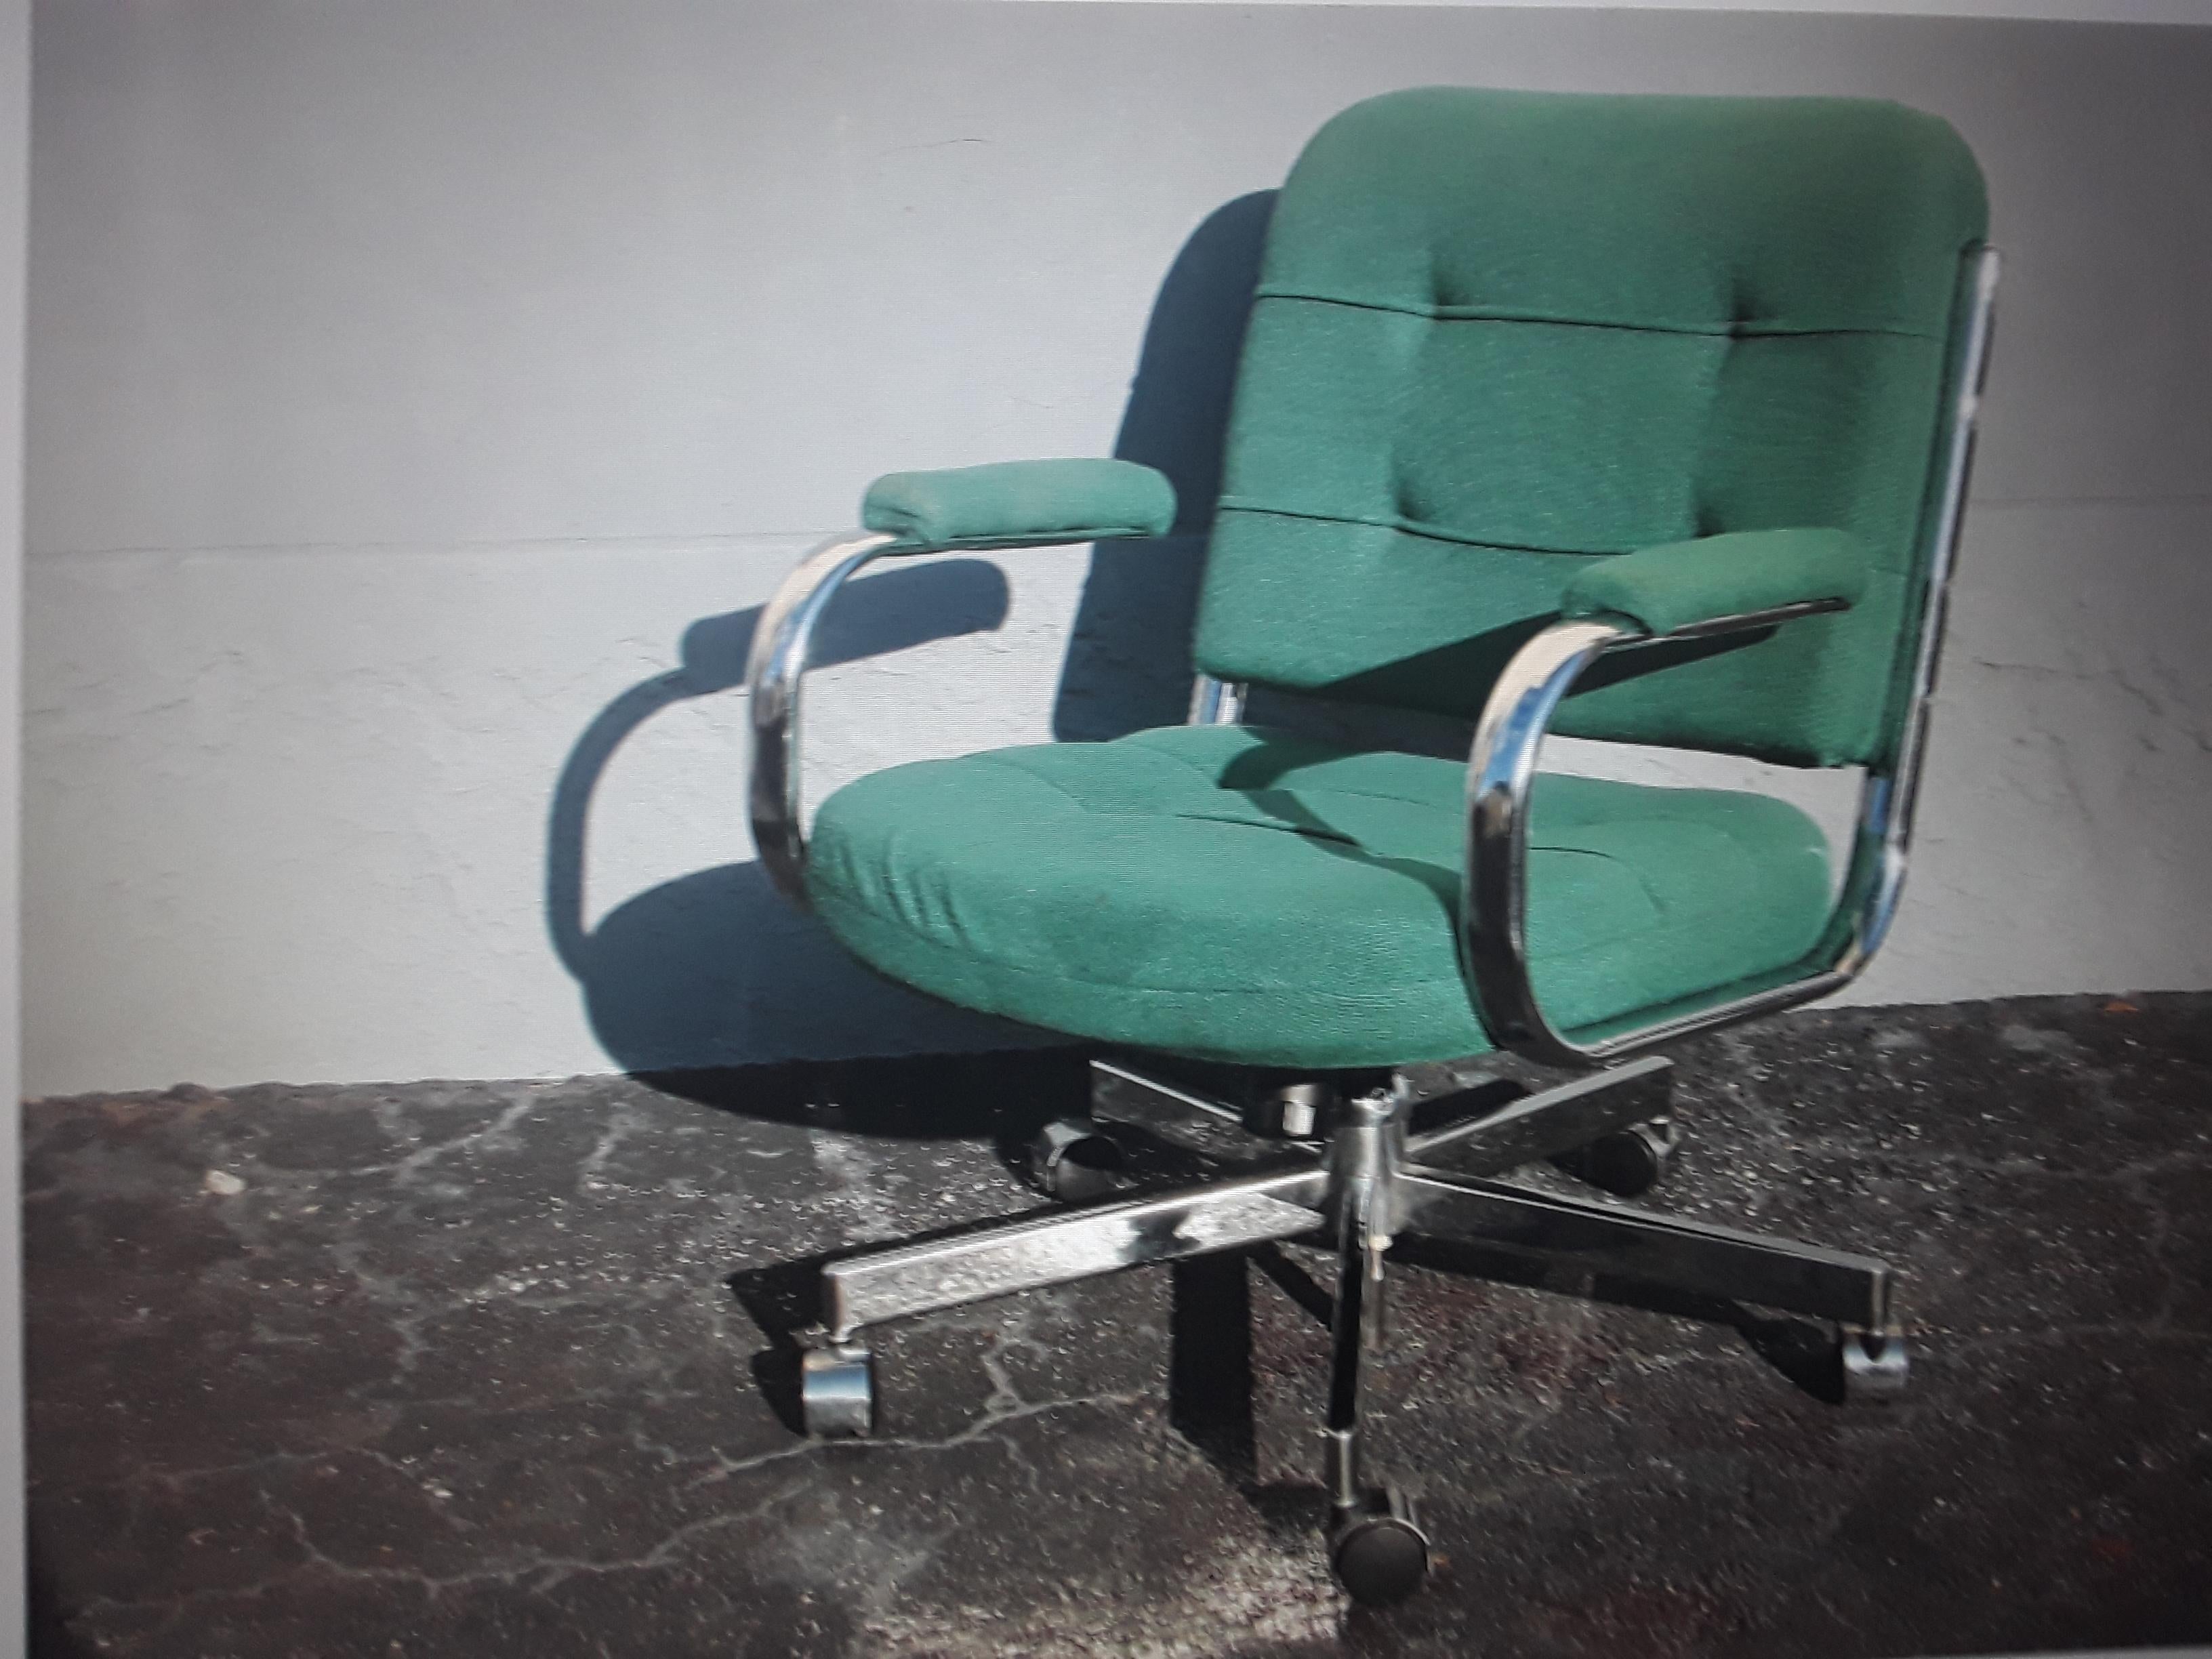 1970's Ultra Modern Adjustable Office Desk Chair. Very nice quality. Green color.